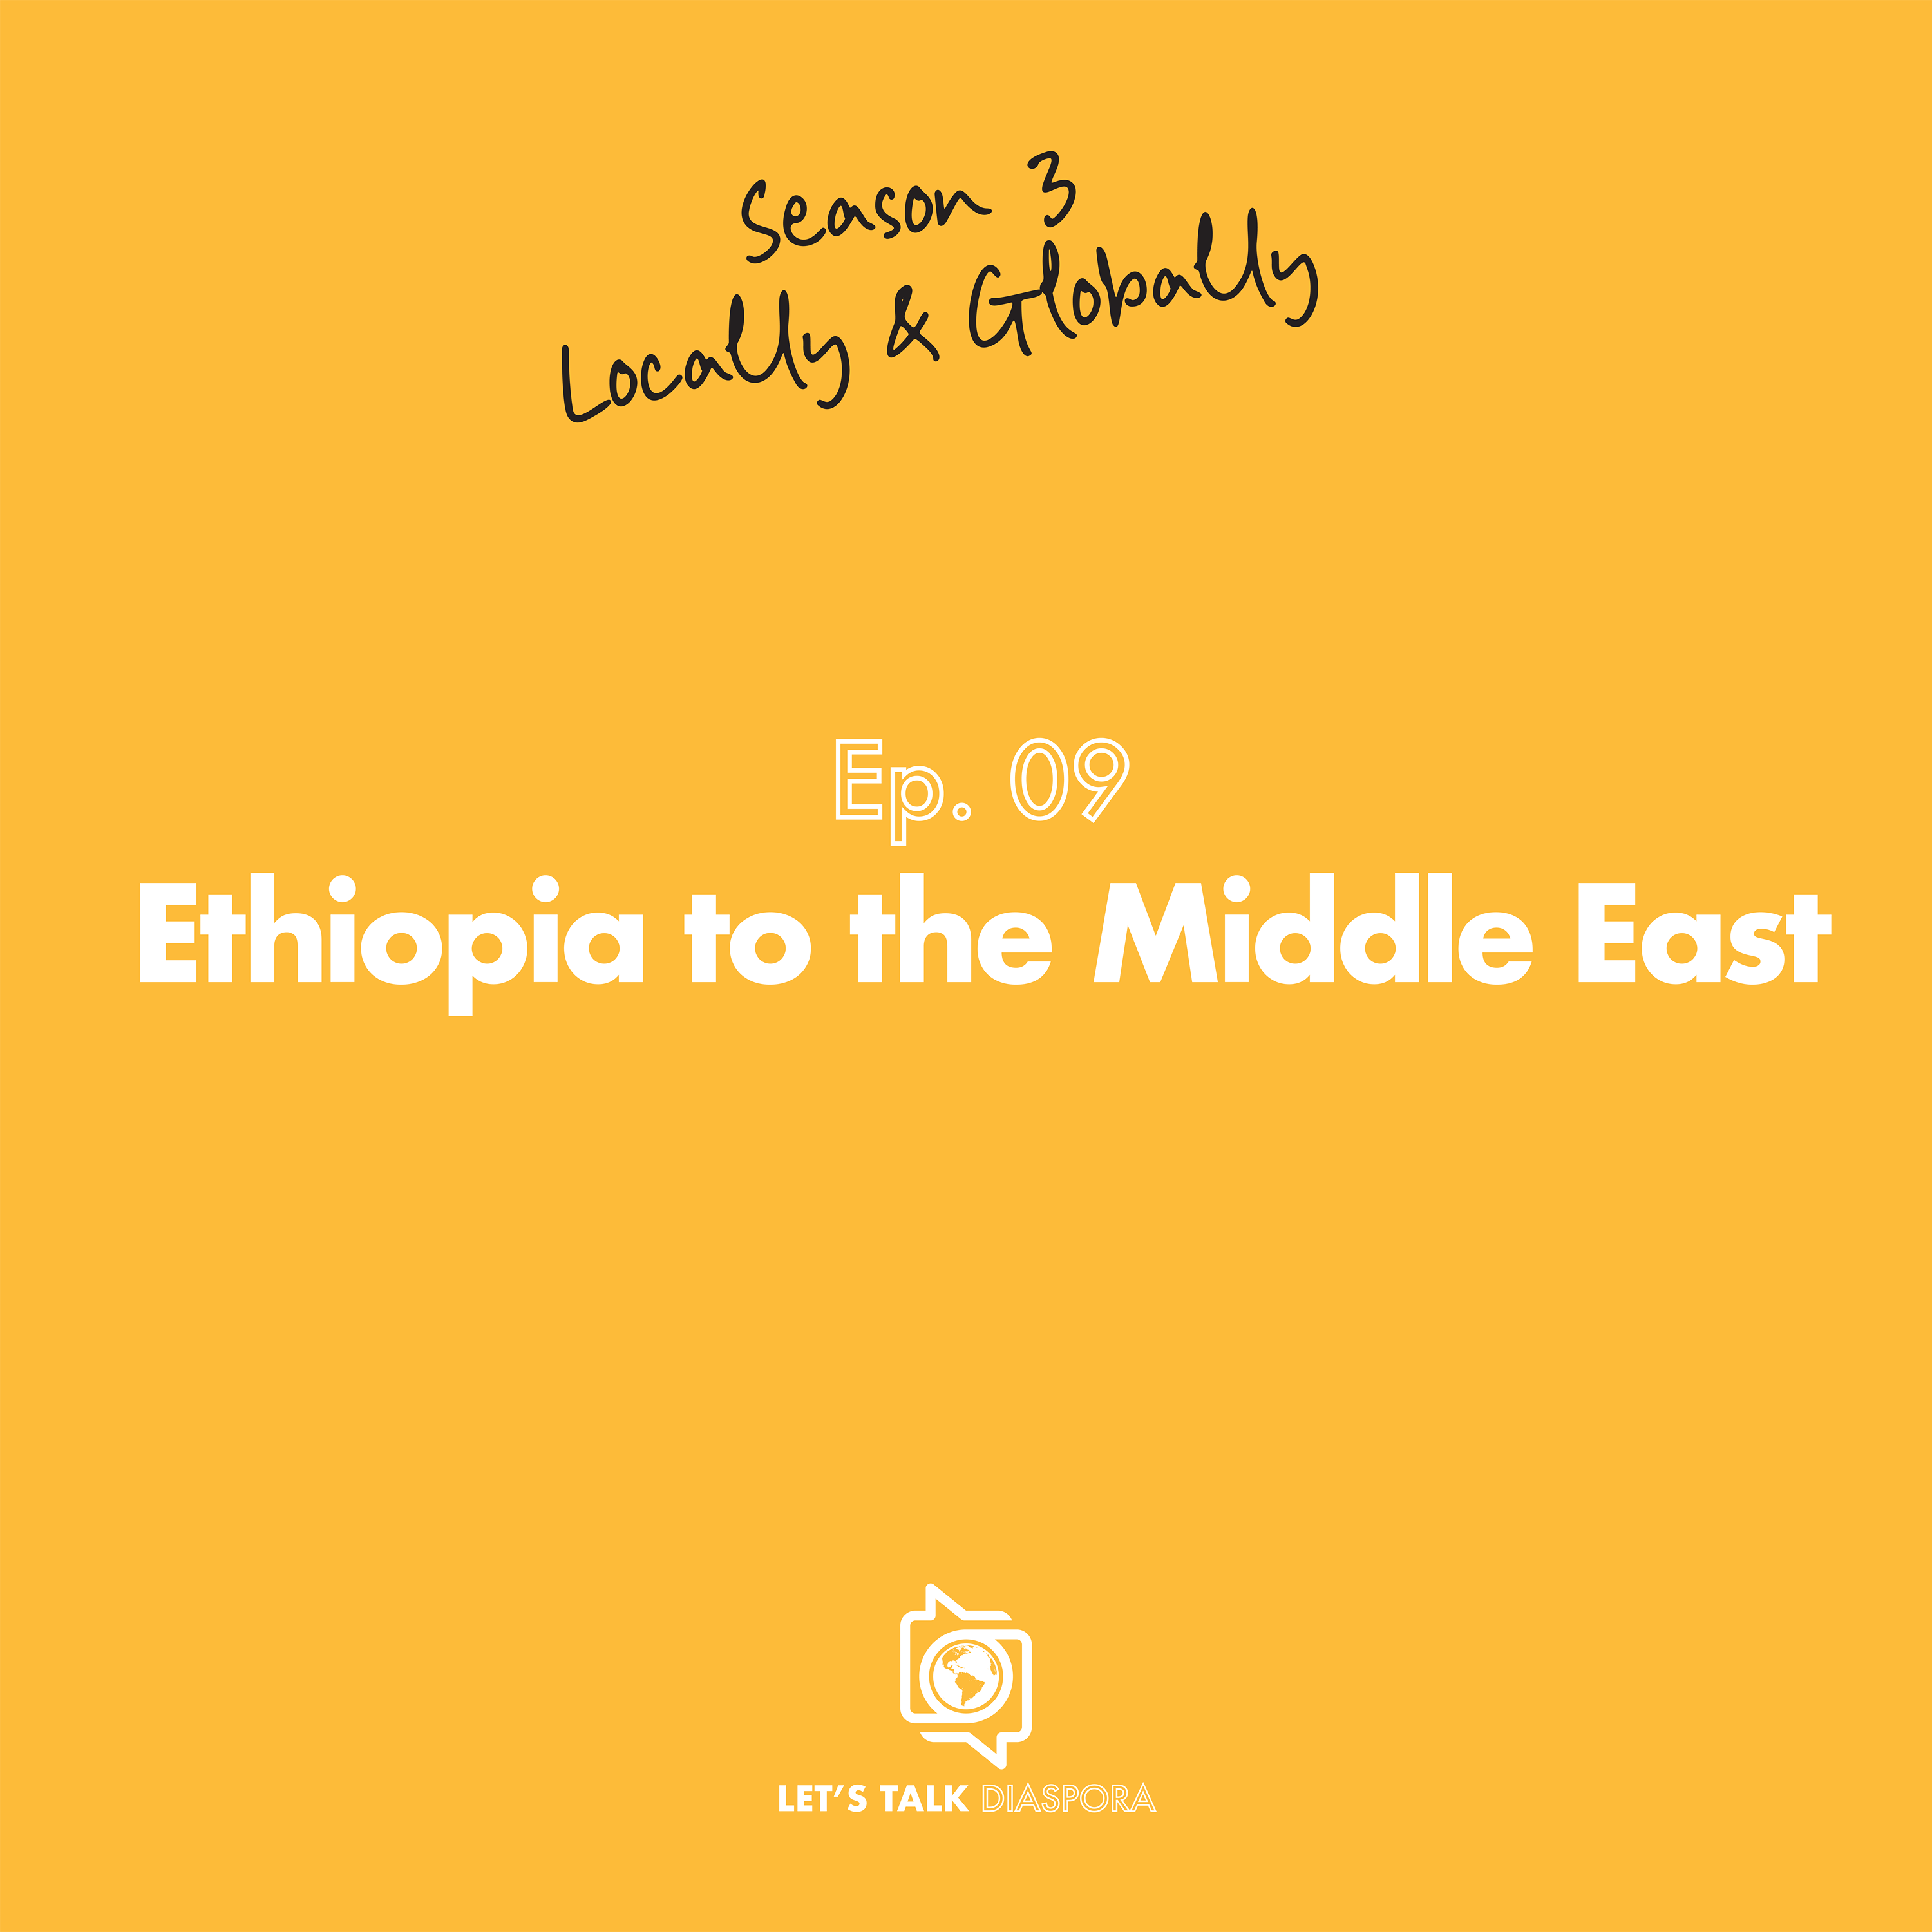 Ethiopia to the Middle East